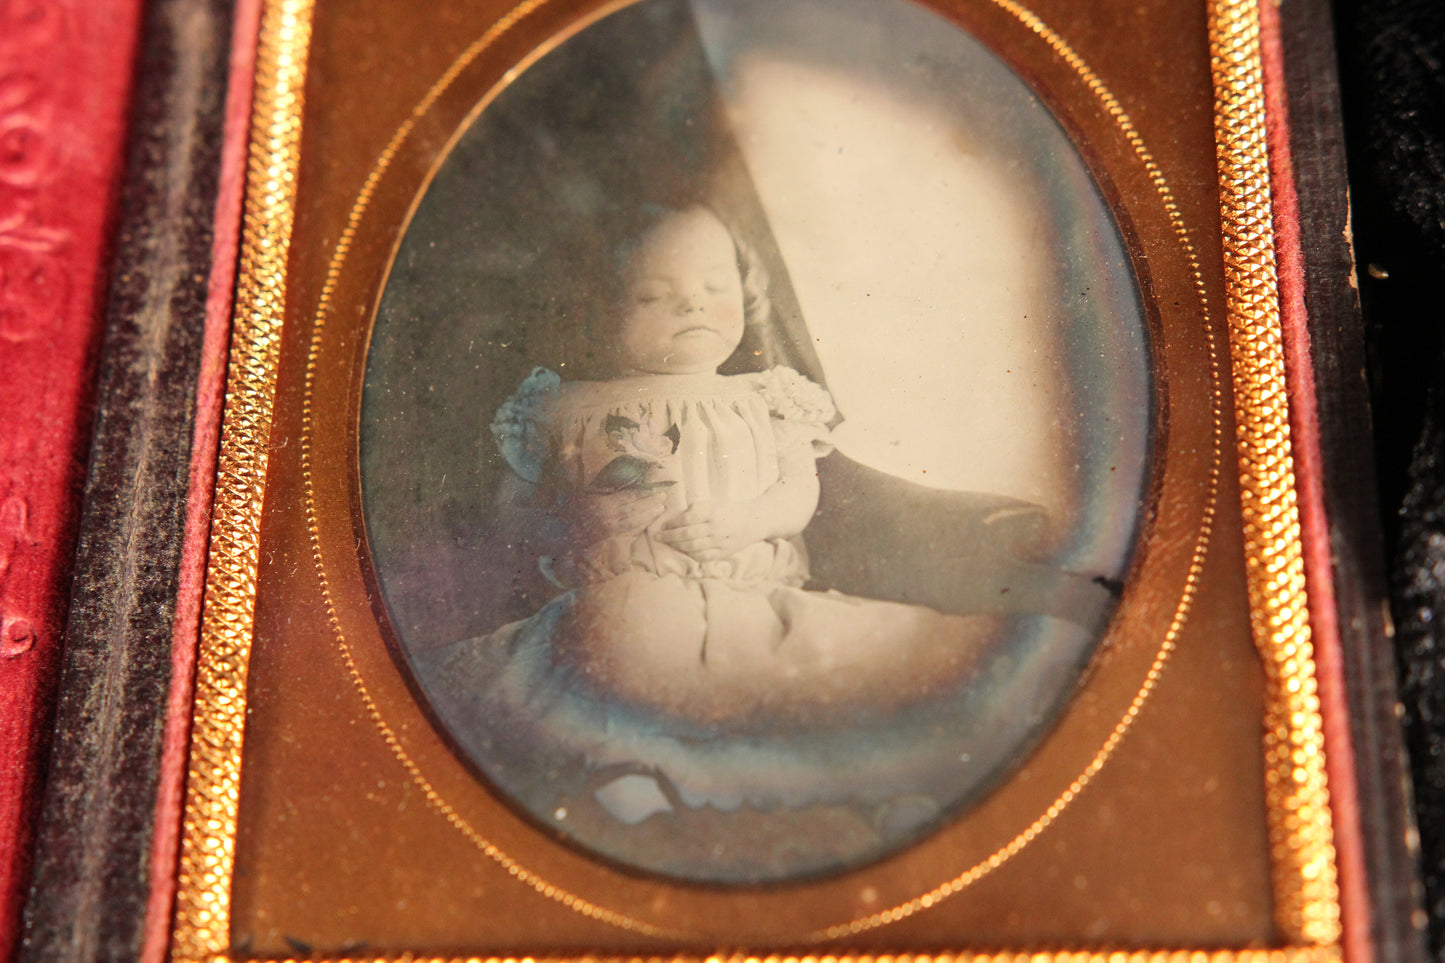 Post Mortem Ambrotype of a Baby Girl in Full Union Case, Sixth-Plate